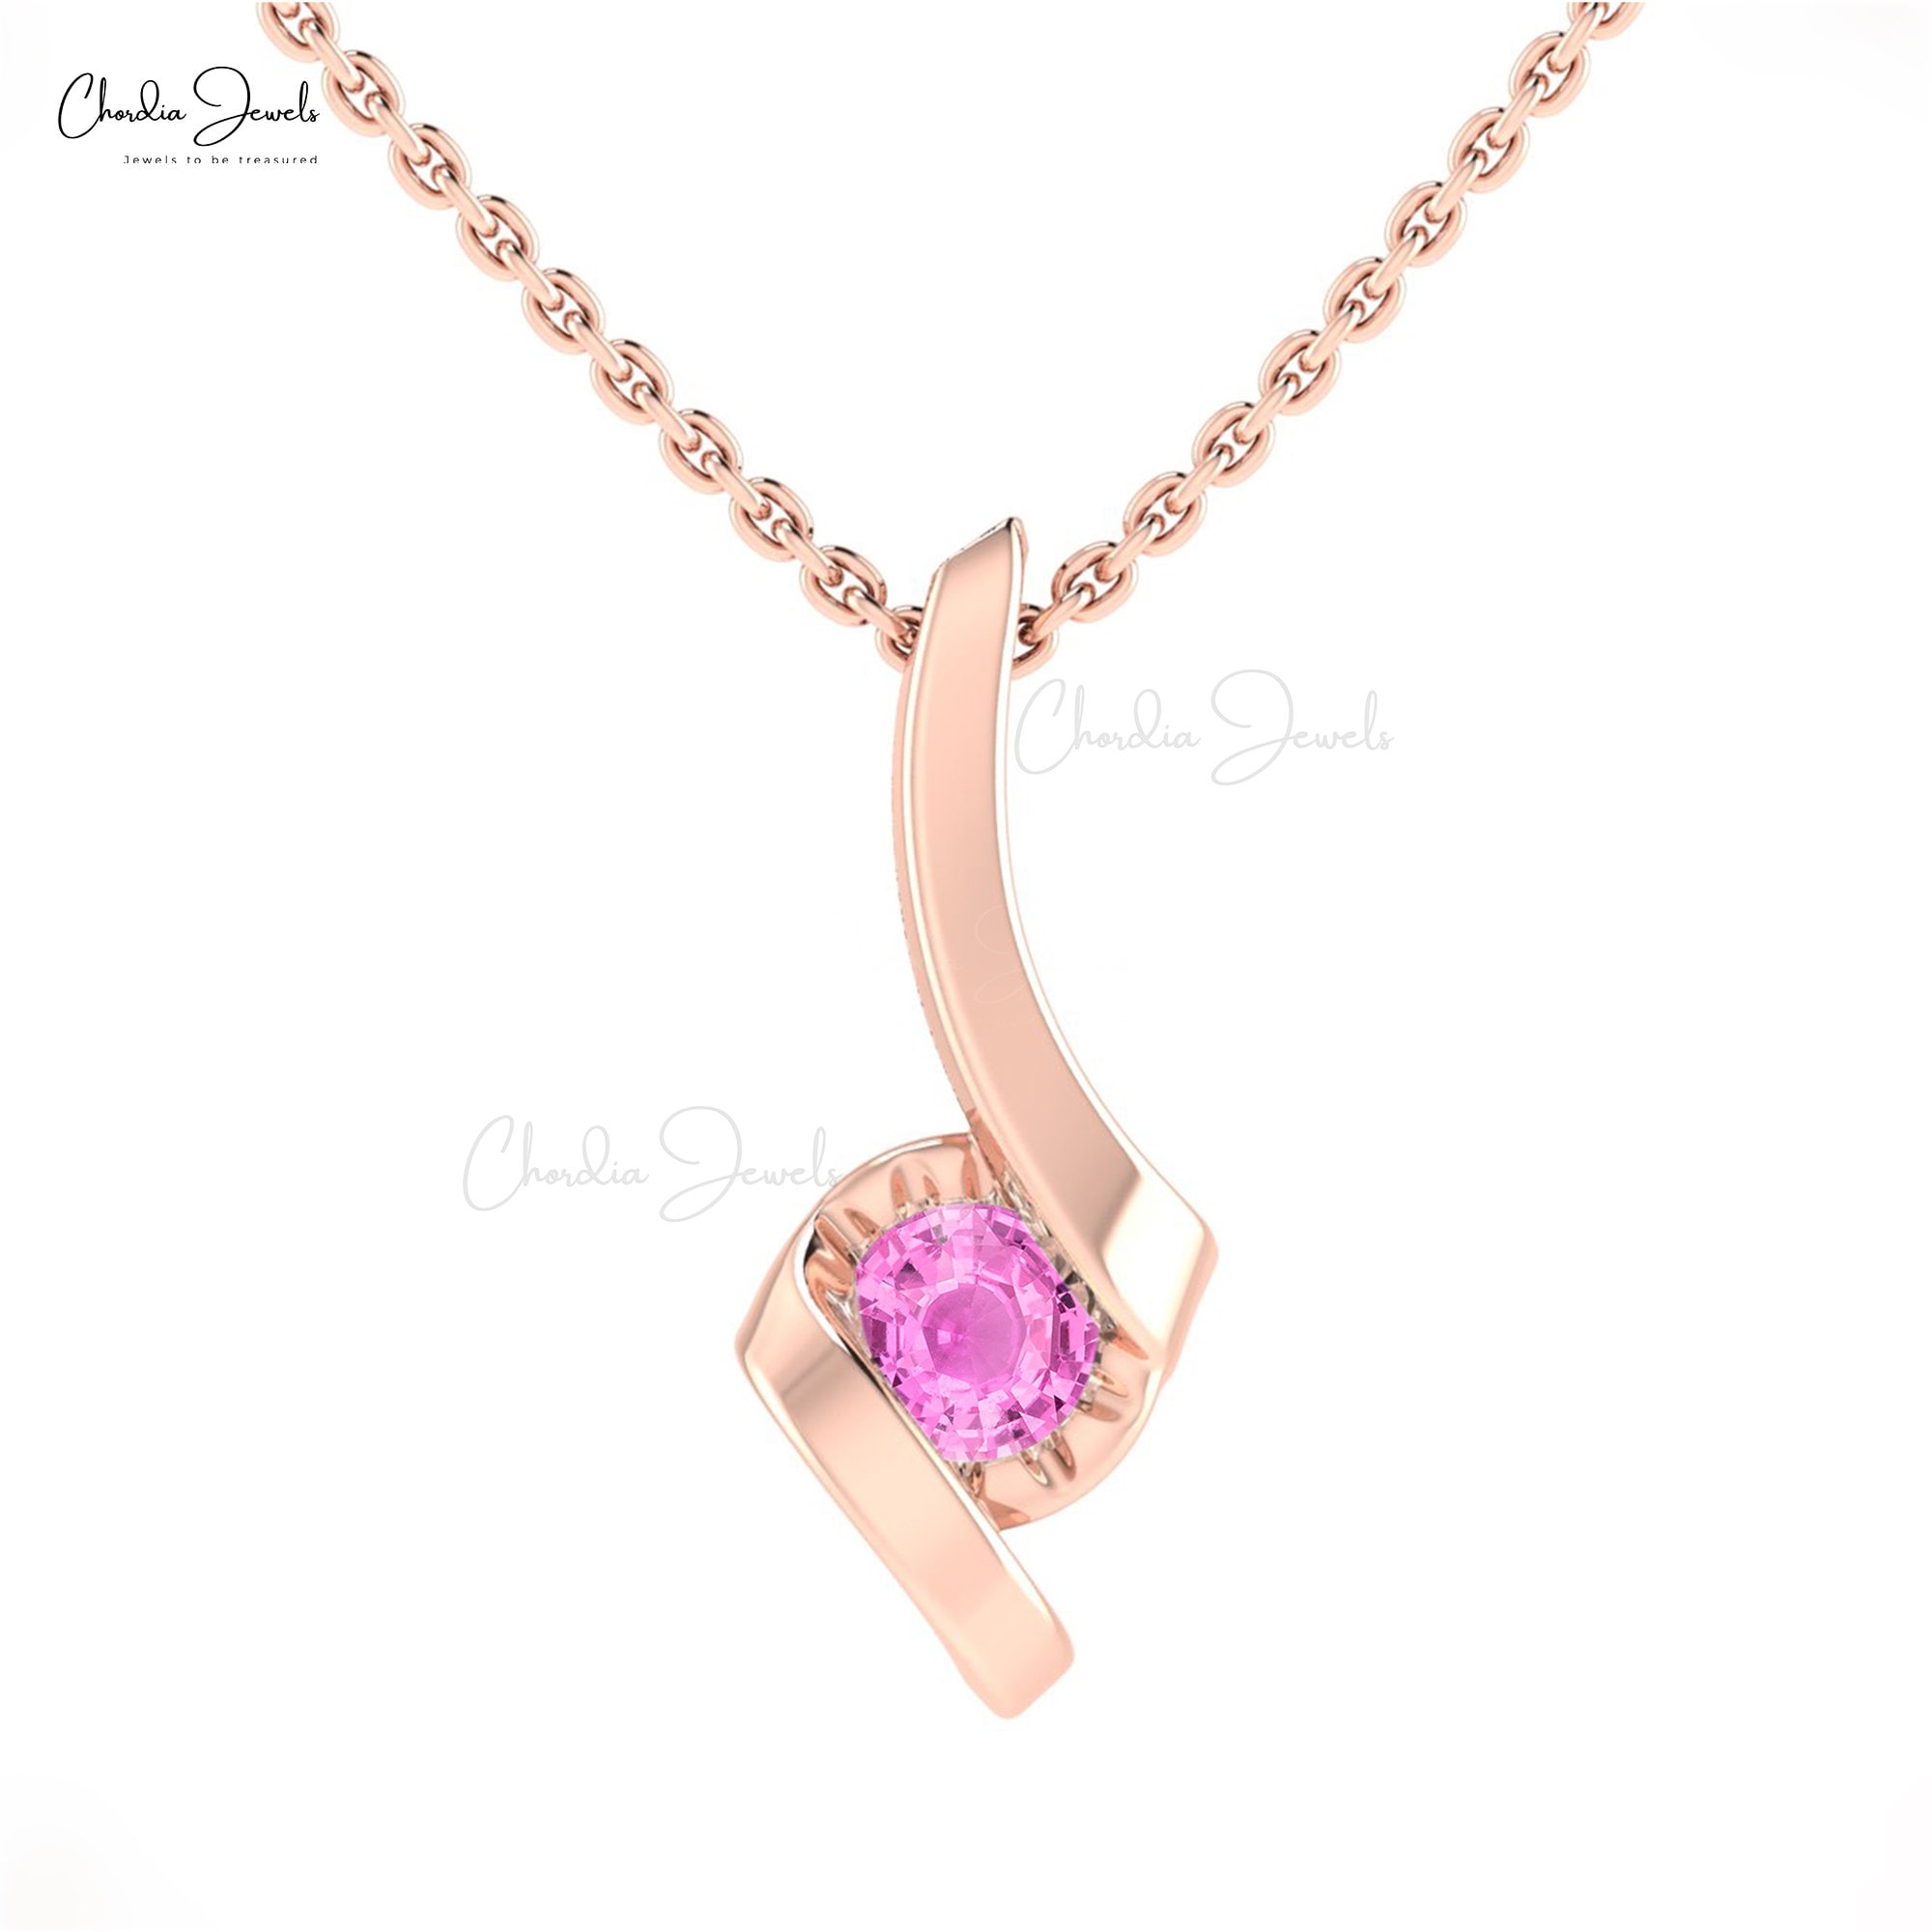 Classic Pink Sapphire Dainty Diamond Halo Pendant 7x5mm Oval Cut Gemstone  Pendant For Gift 14k Real Gold Pendant Jewelry For Women